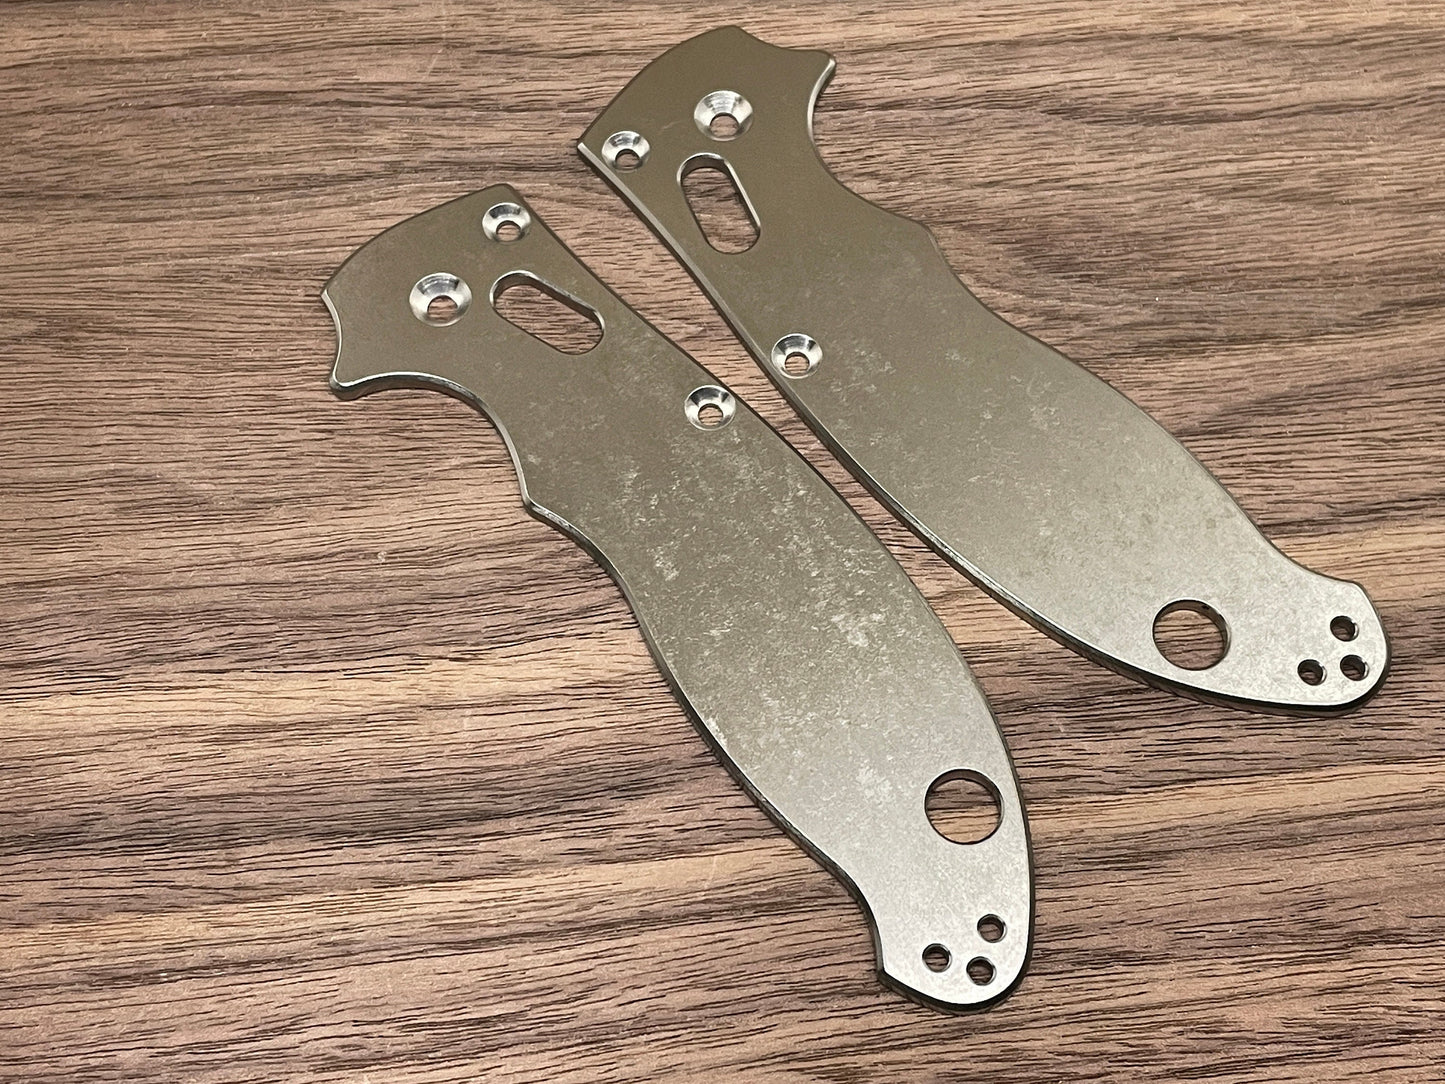 Stone Washed Titanium scales for Spyderco MANIX 2